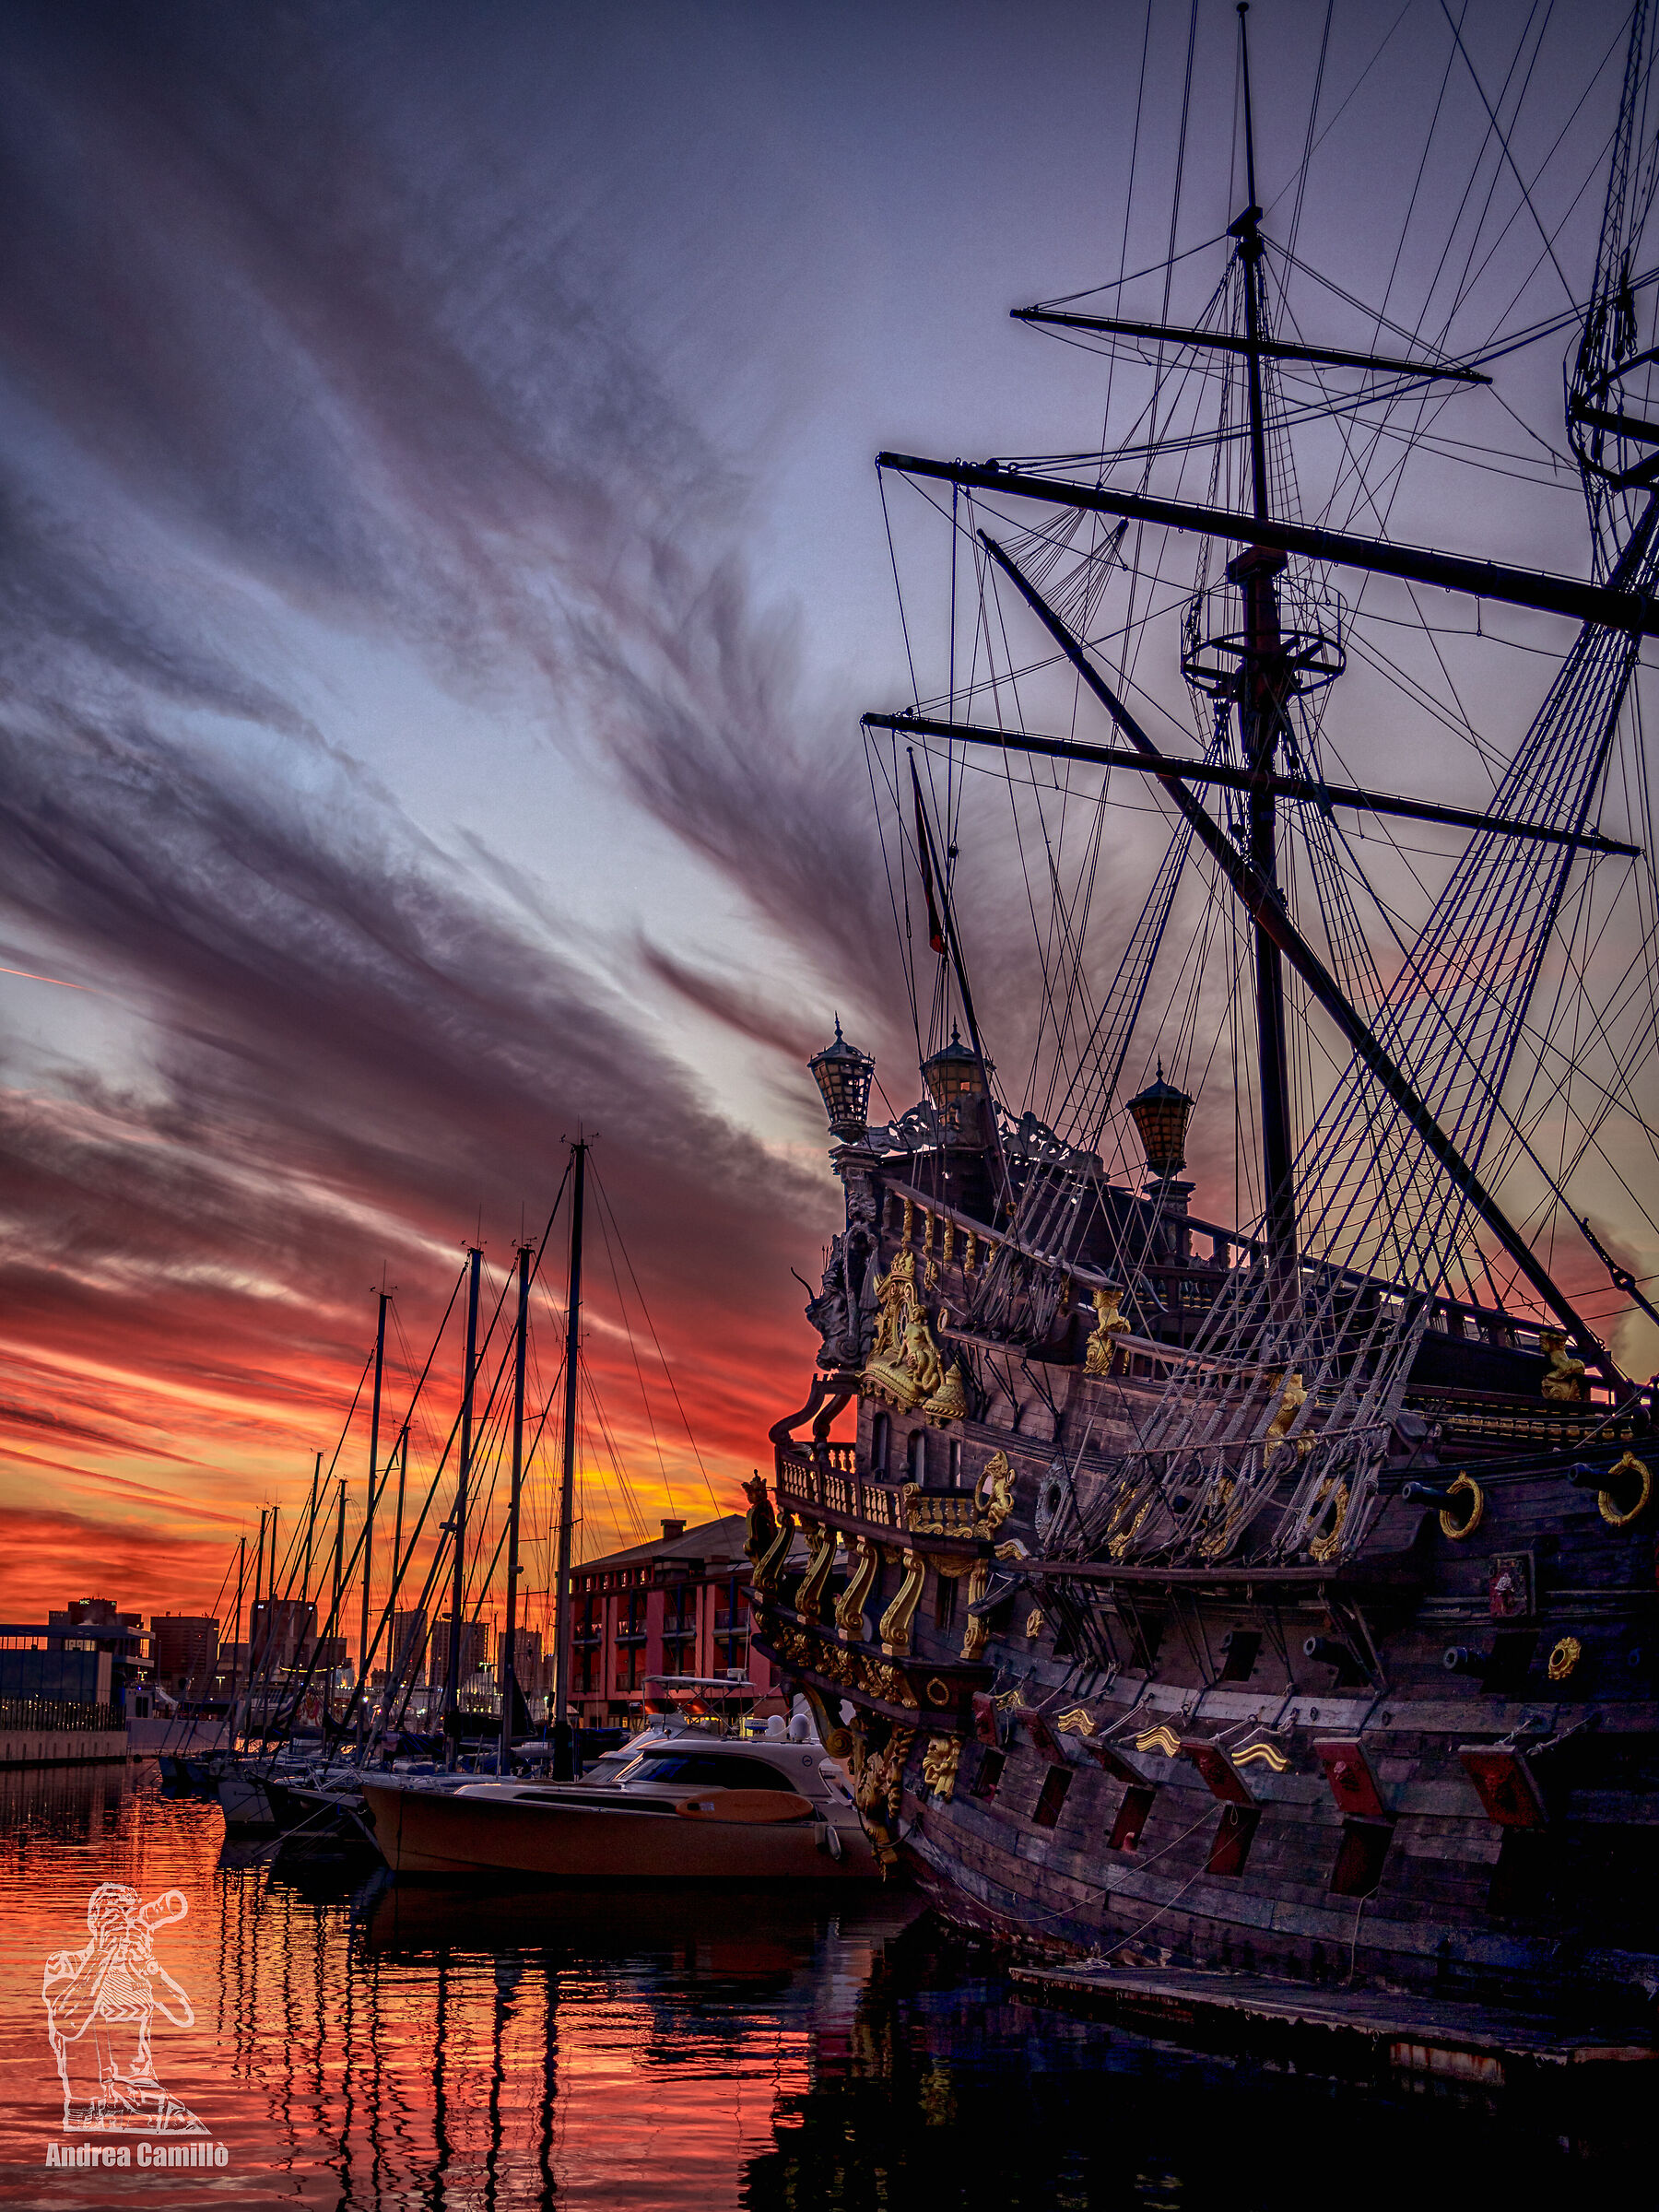 The Galleon at sunset...